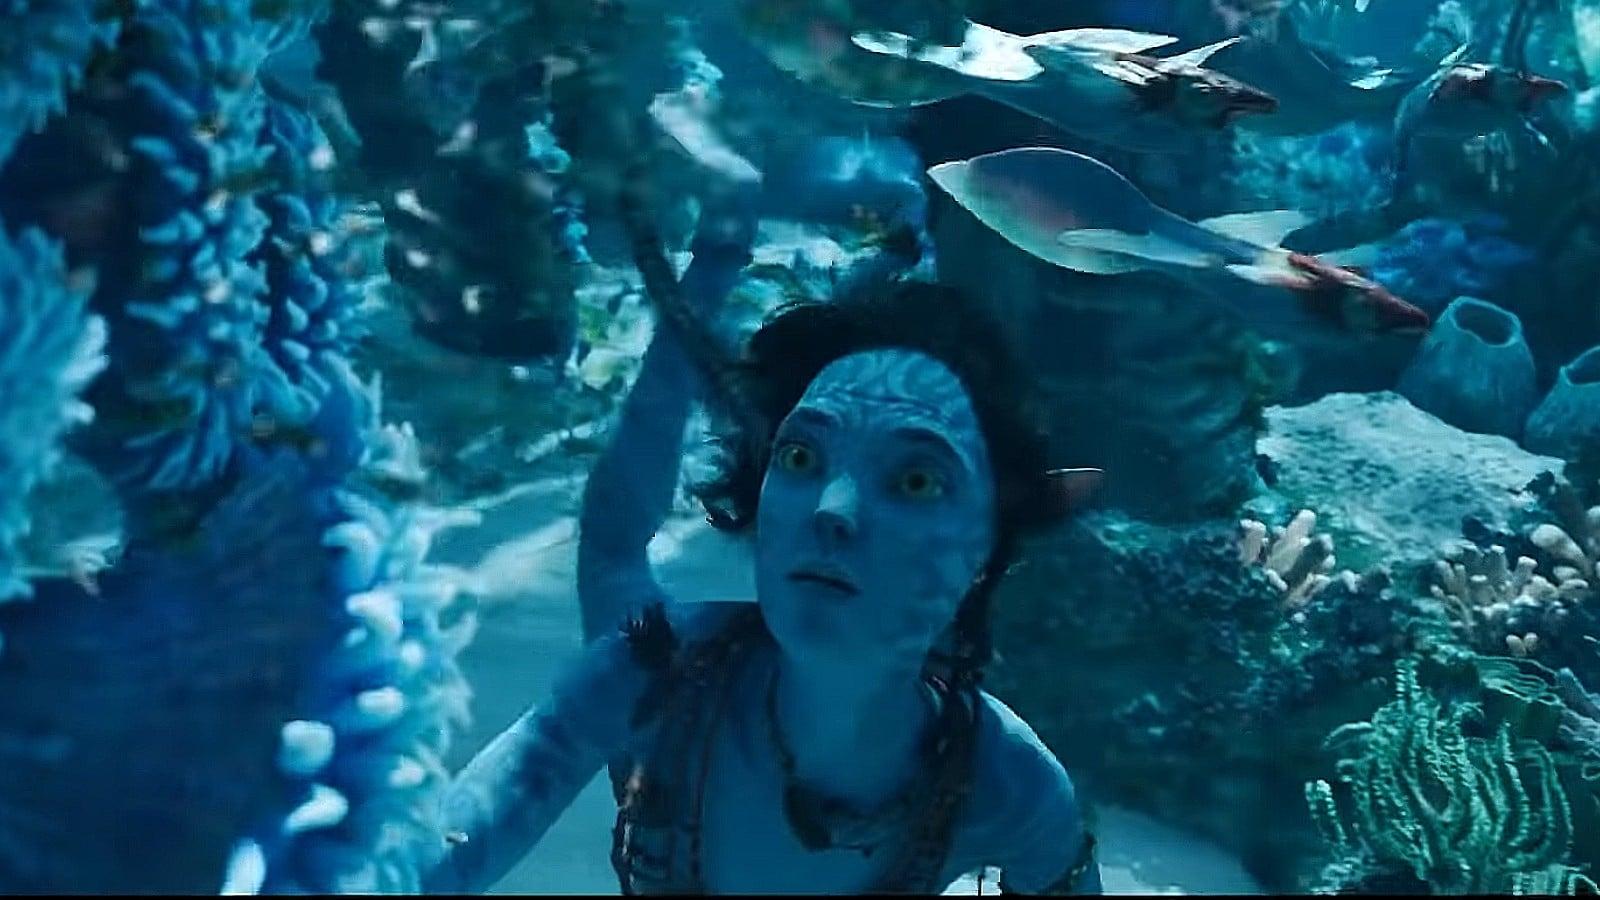 Avatar: The Way of Water hits theaters on December 16.